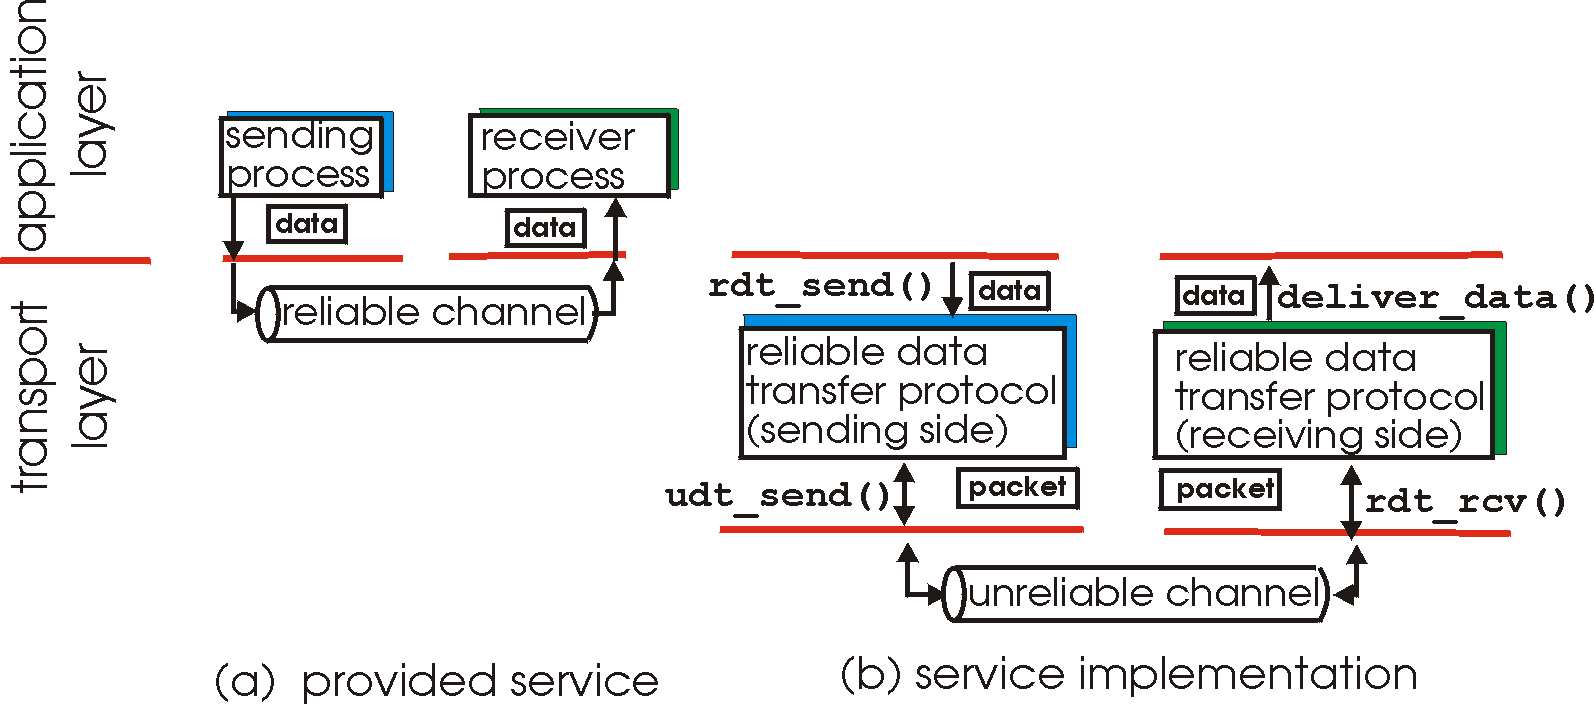 reliable data transfer: service model and service implementation